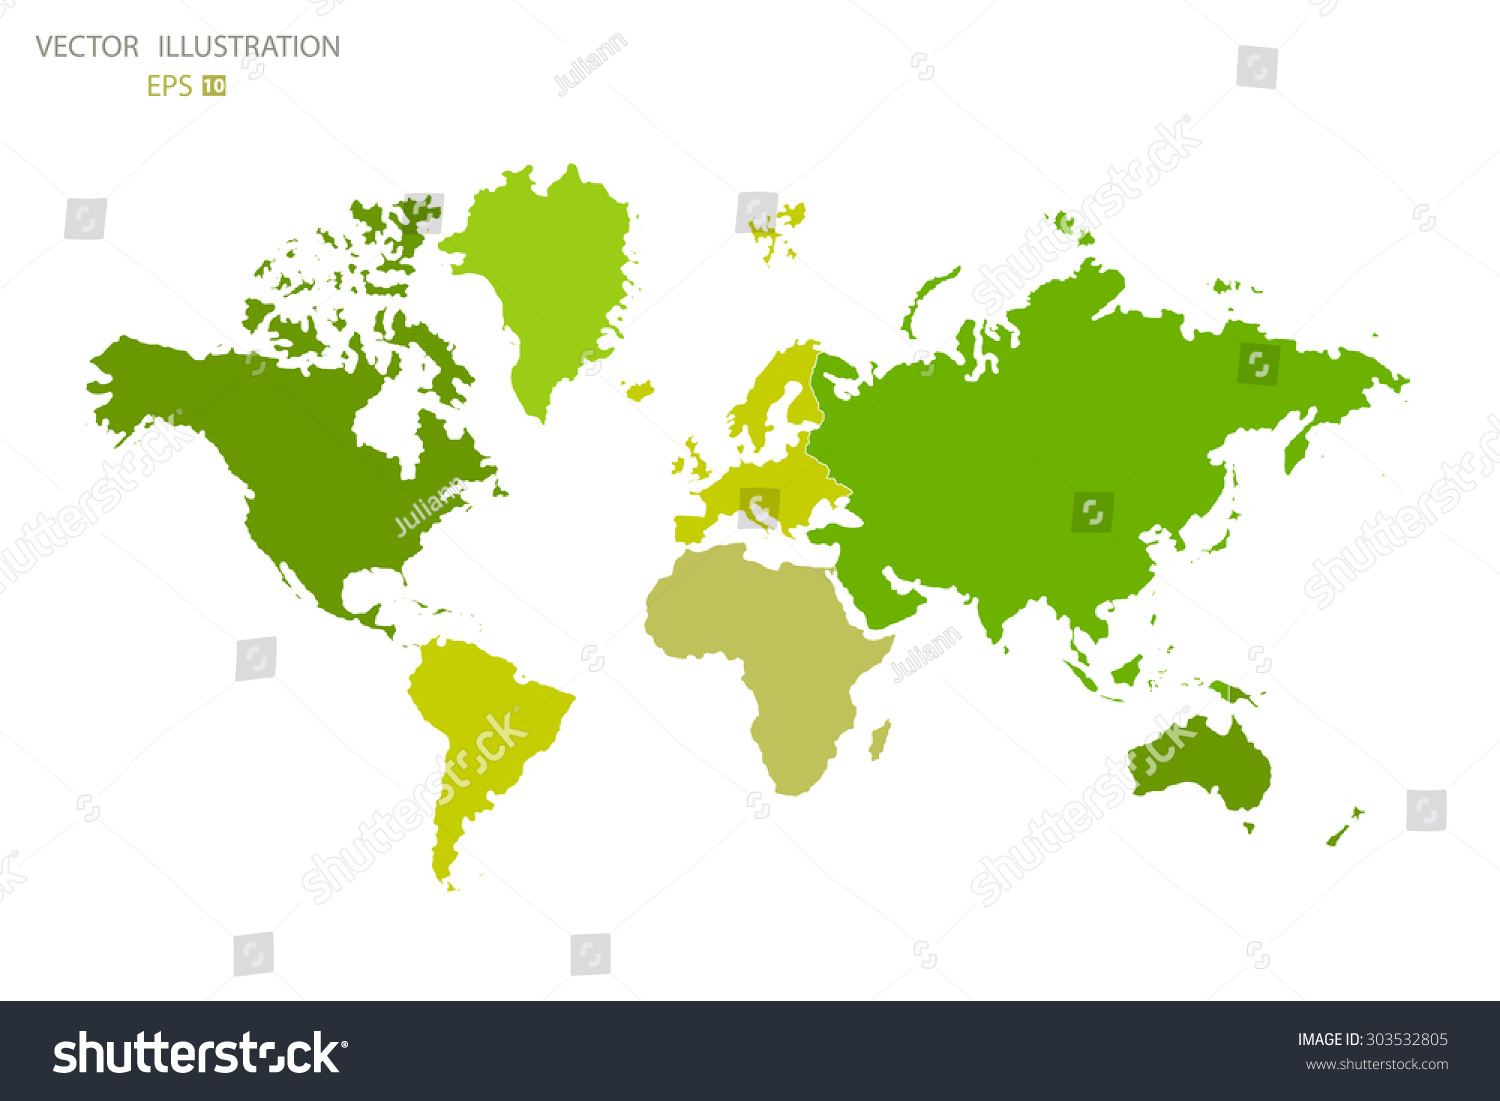 political-map-of-the-world-colorful-world-map-royalty-free-stock